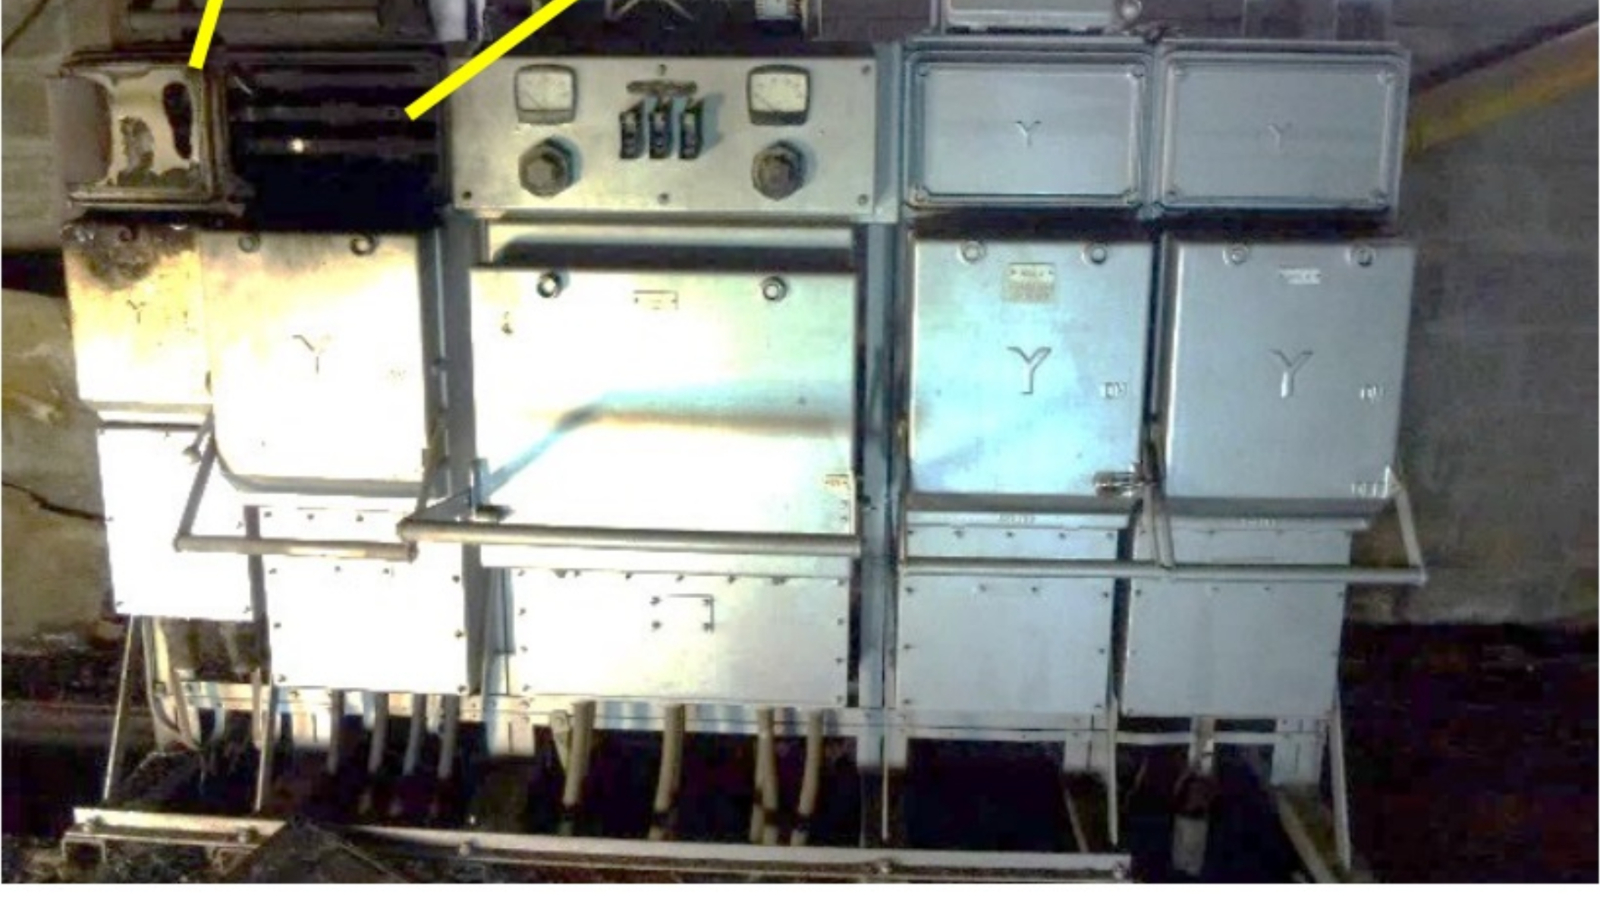 The switchpanel with a damaged area to the top left and panel cover removed.